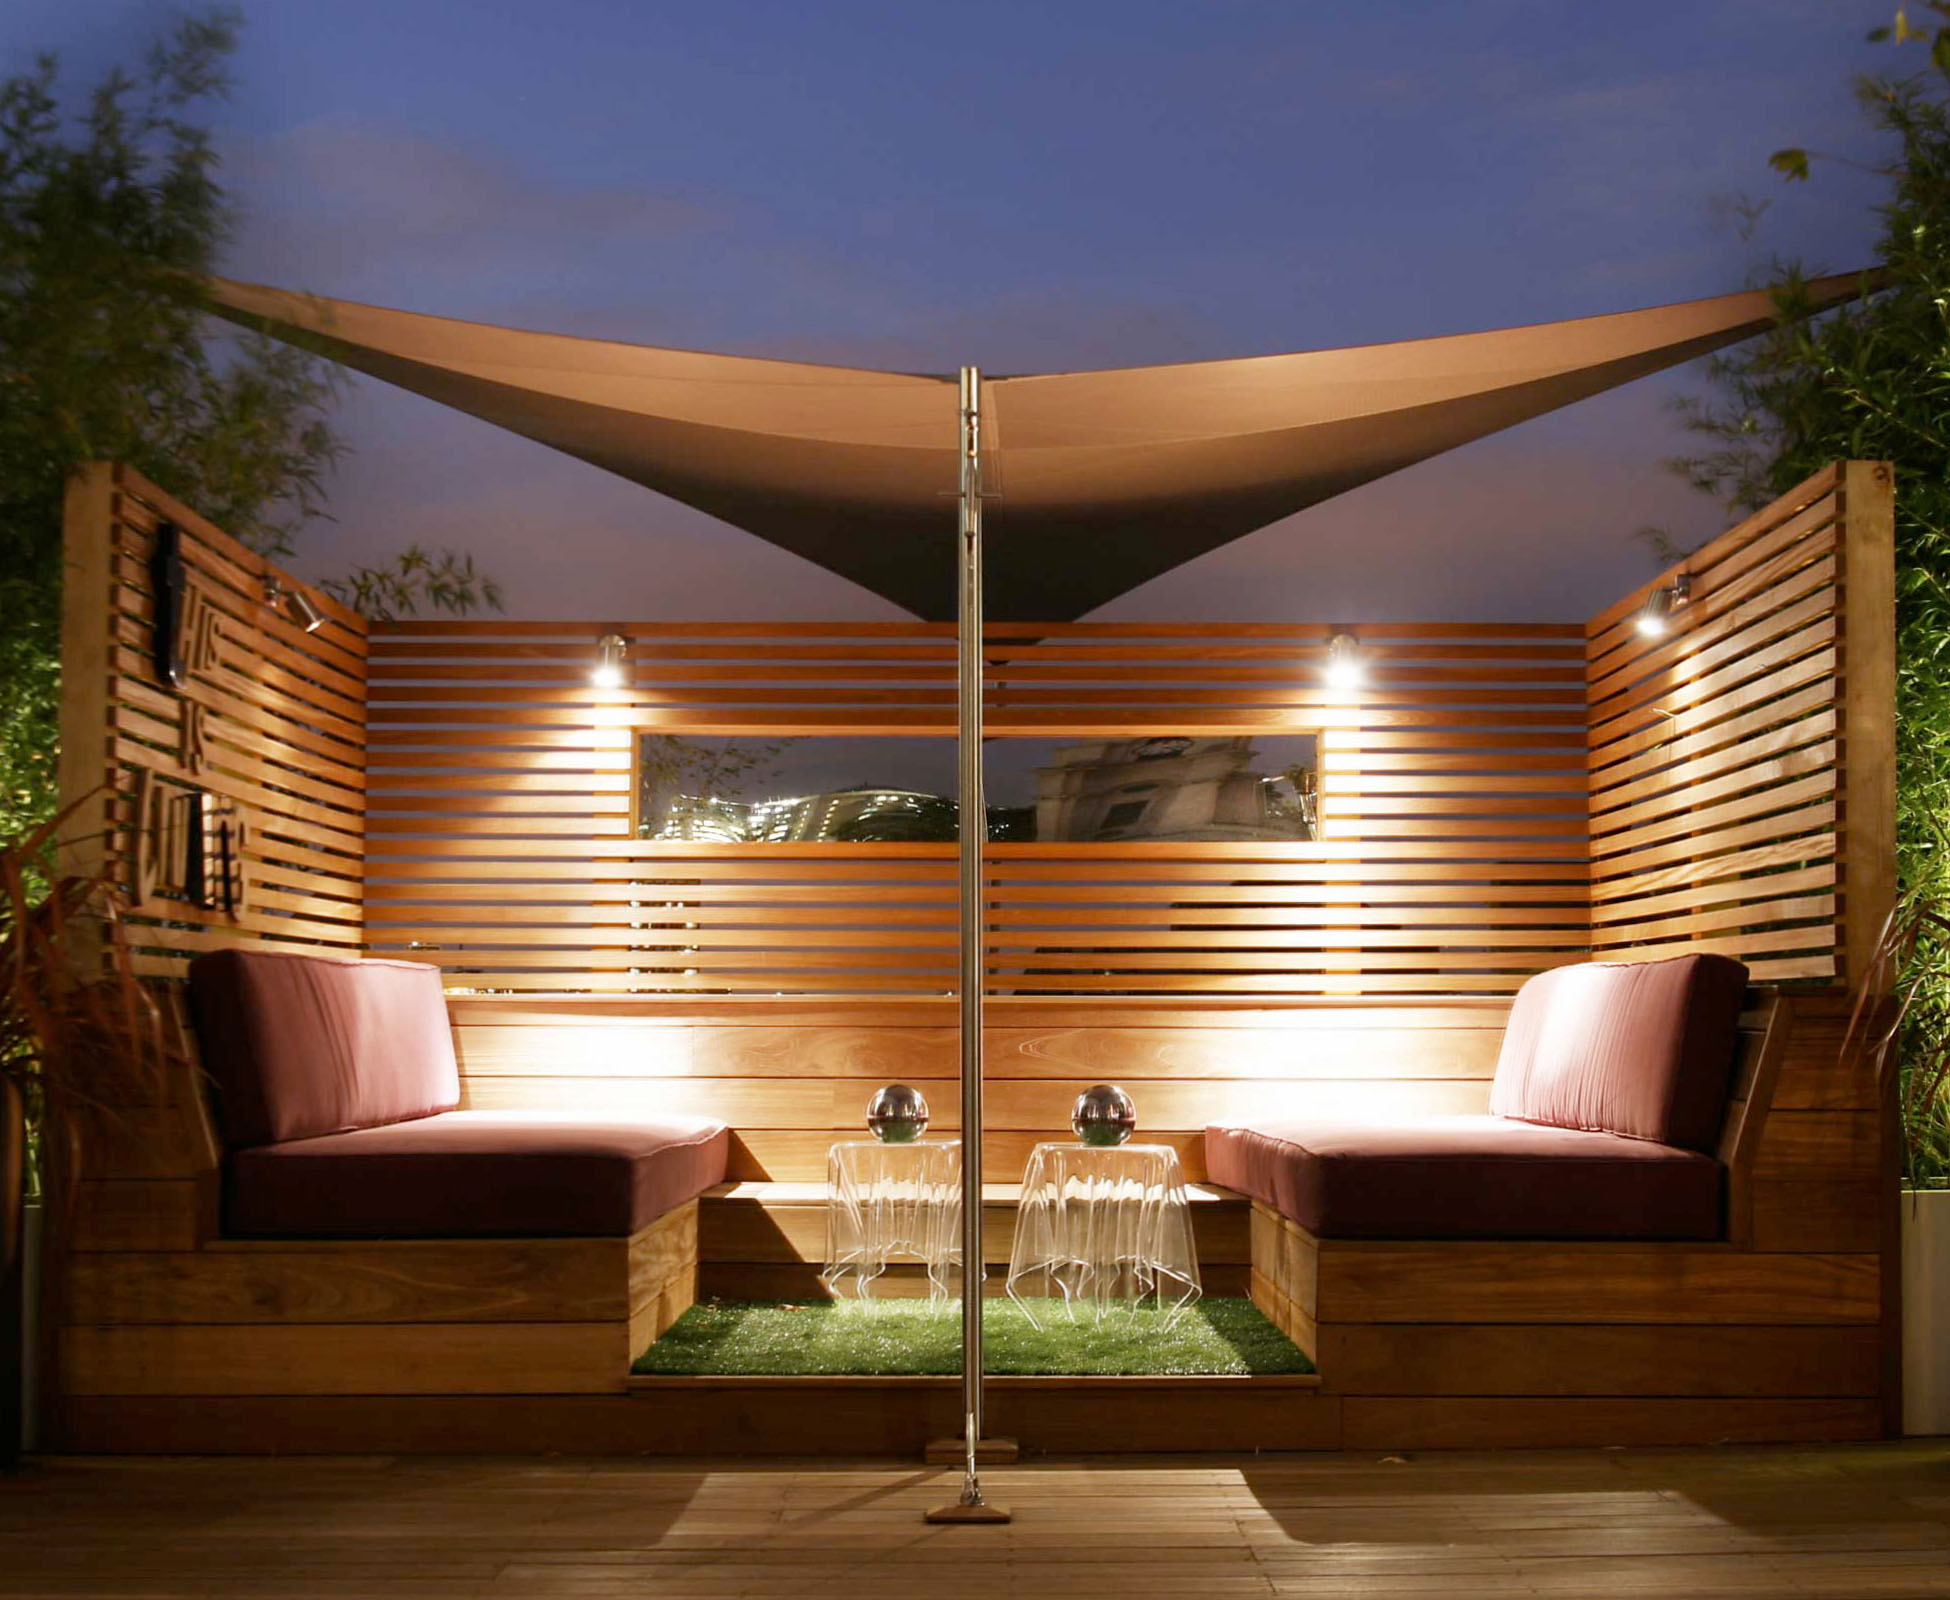 A hyperbolic shade sail sits above the built in seating, creating an intimate atmsosphere.